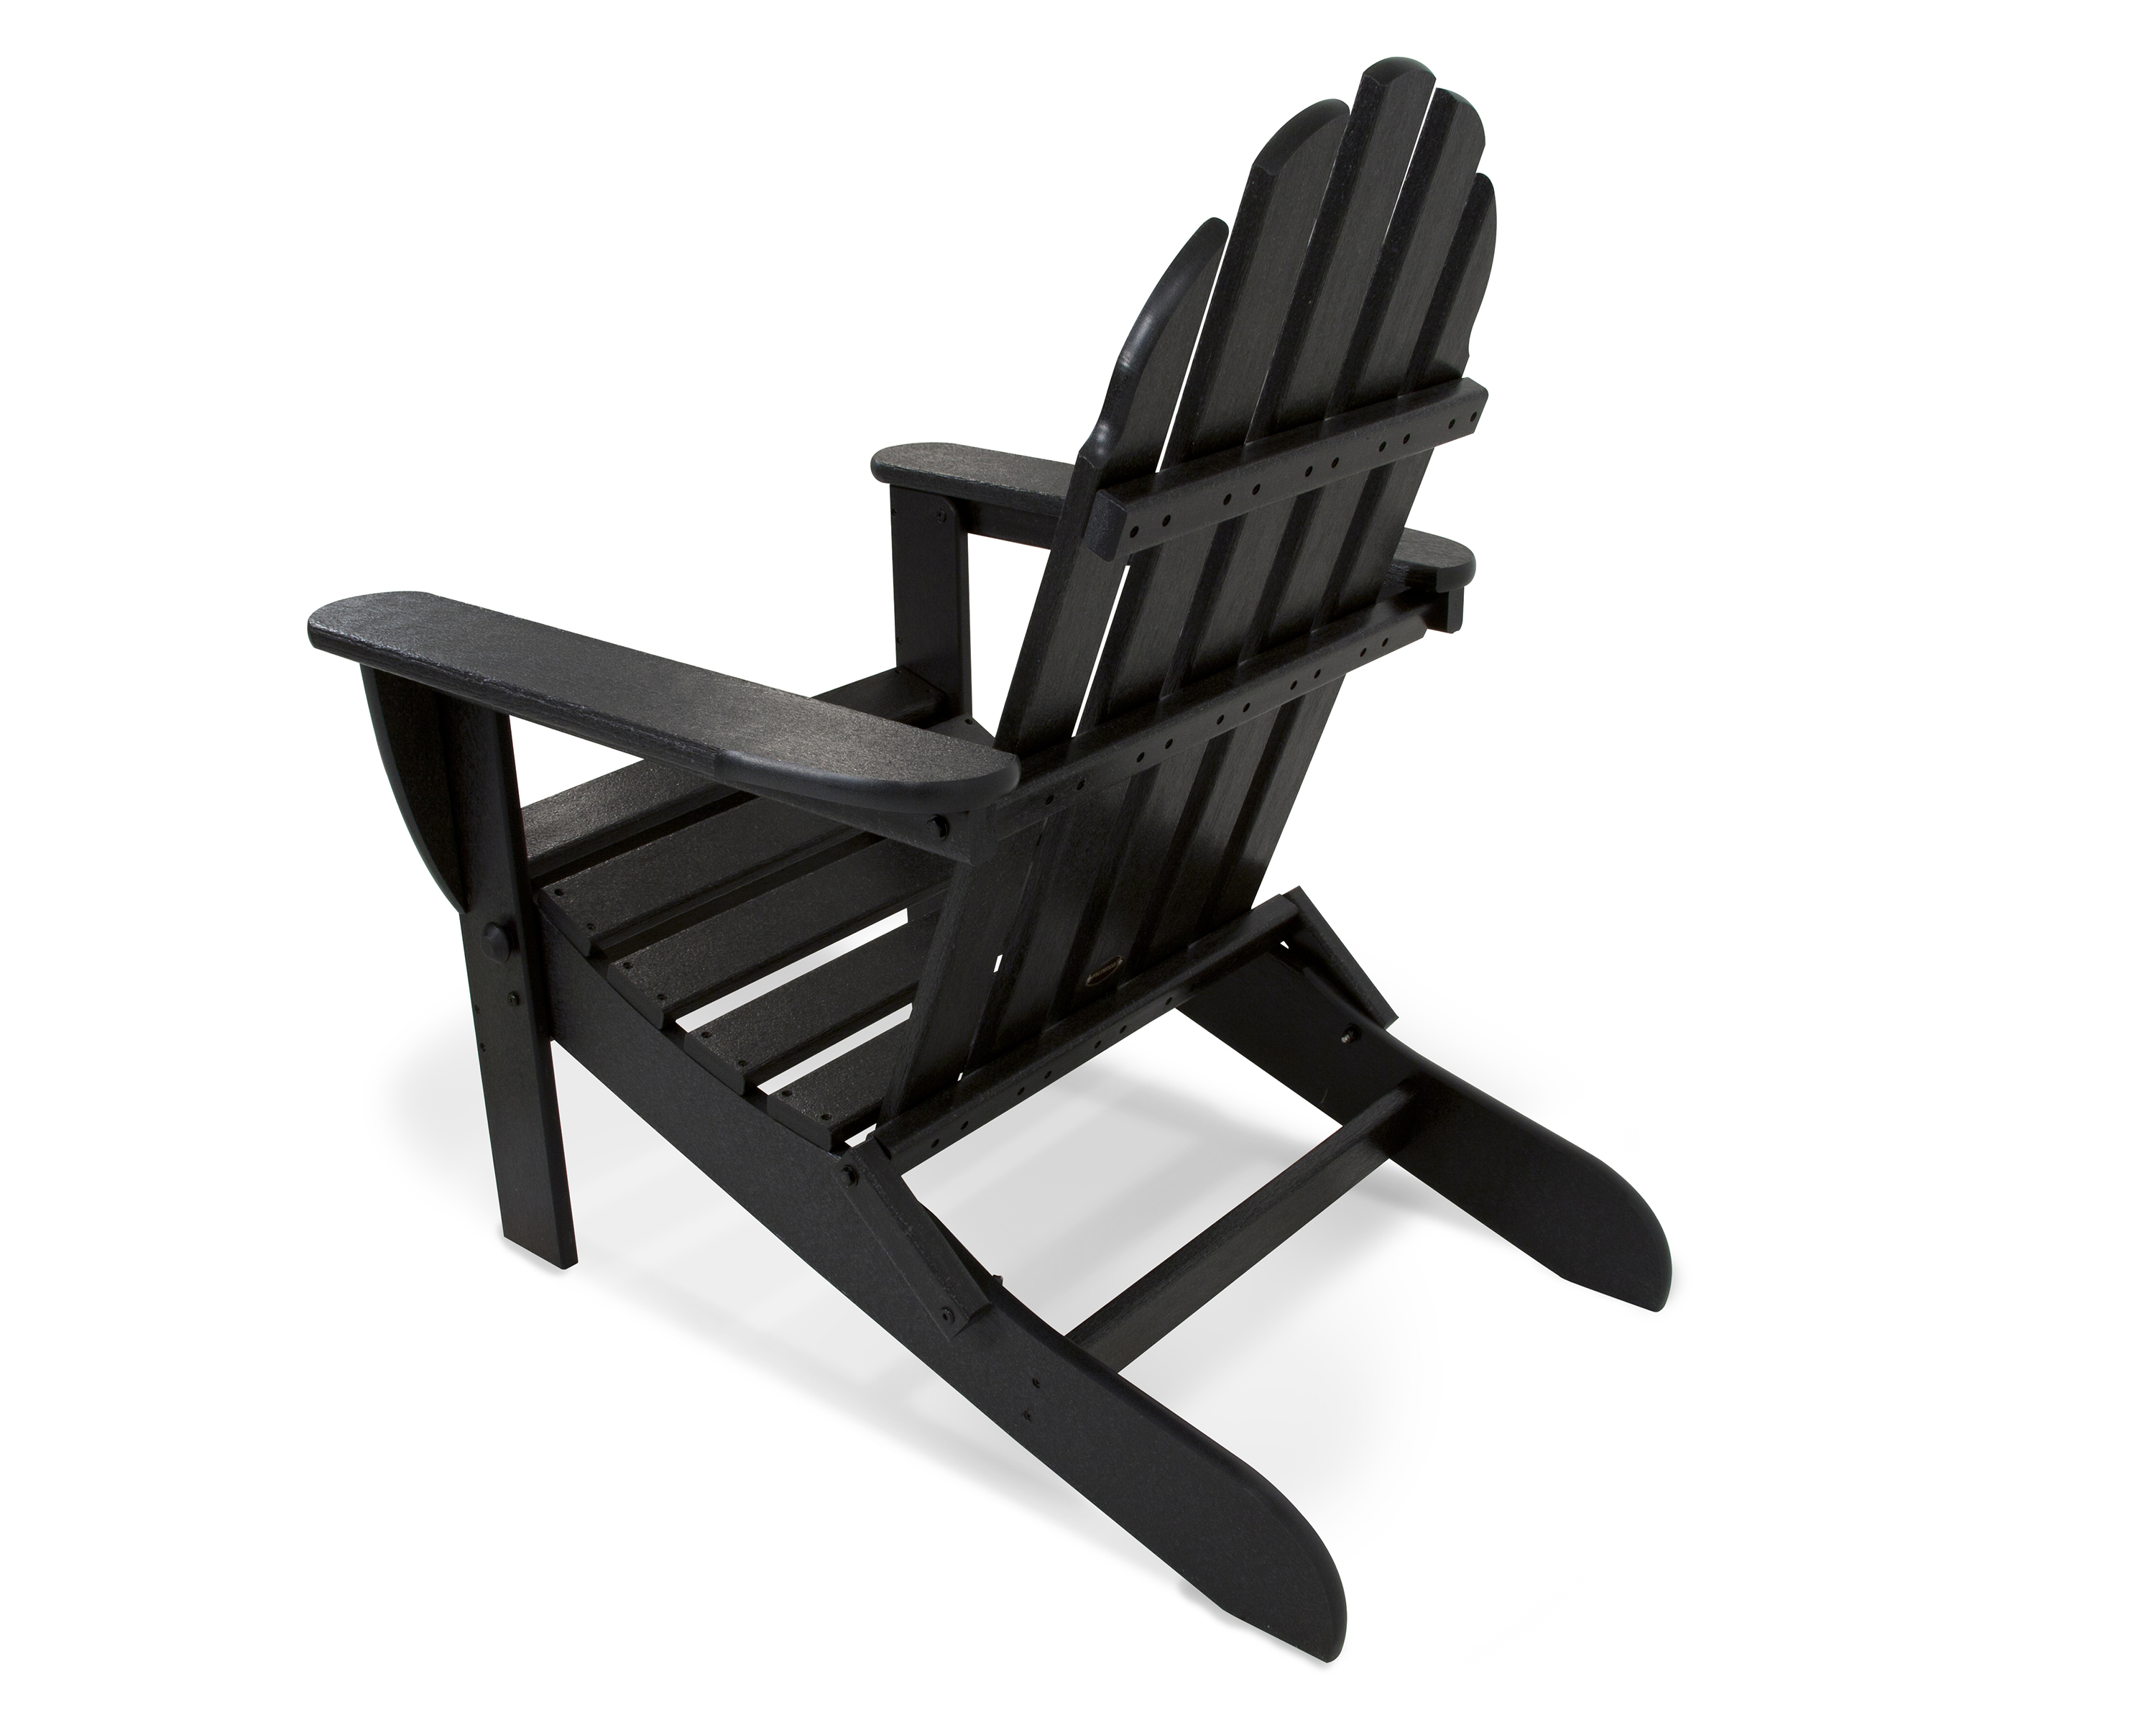 classic folding adirondack chair in black product image